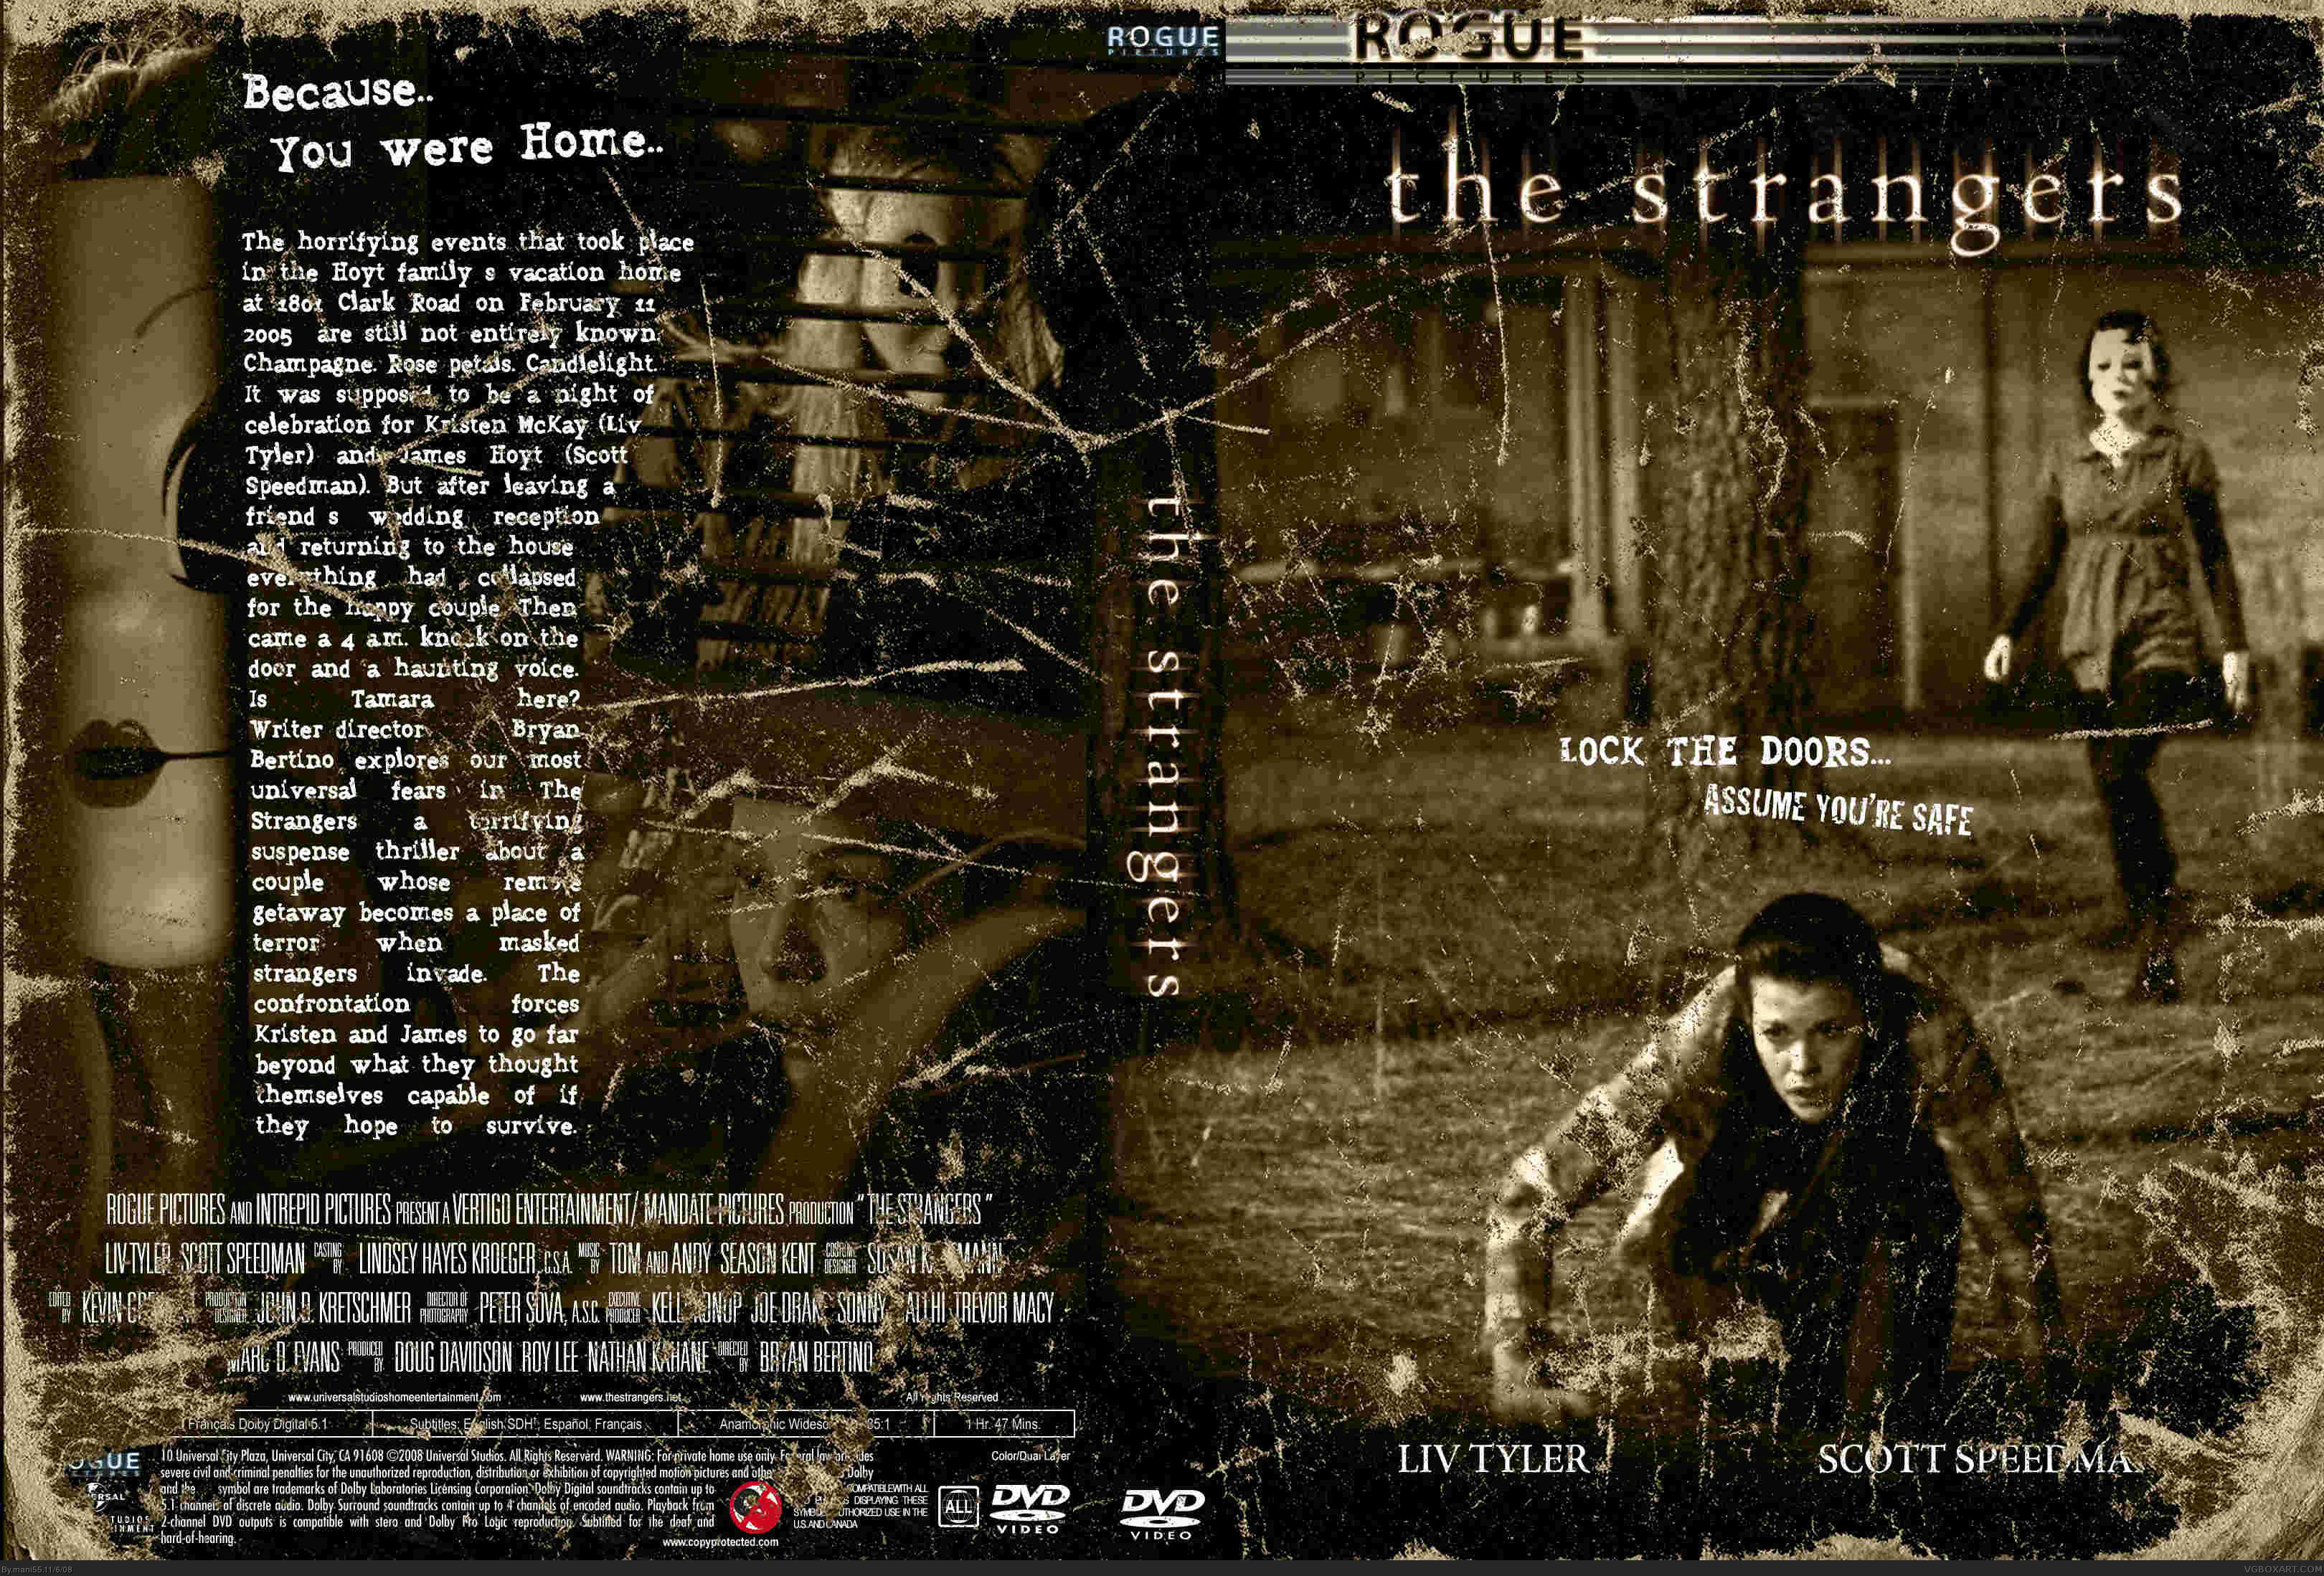 the strangers box cover